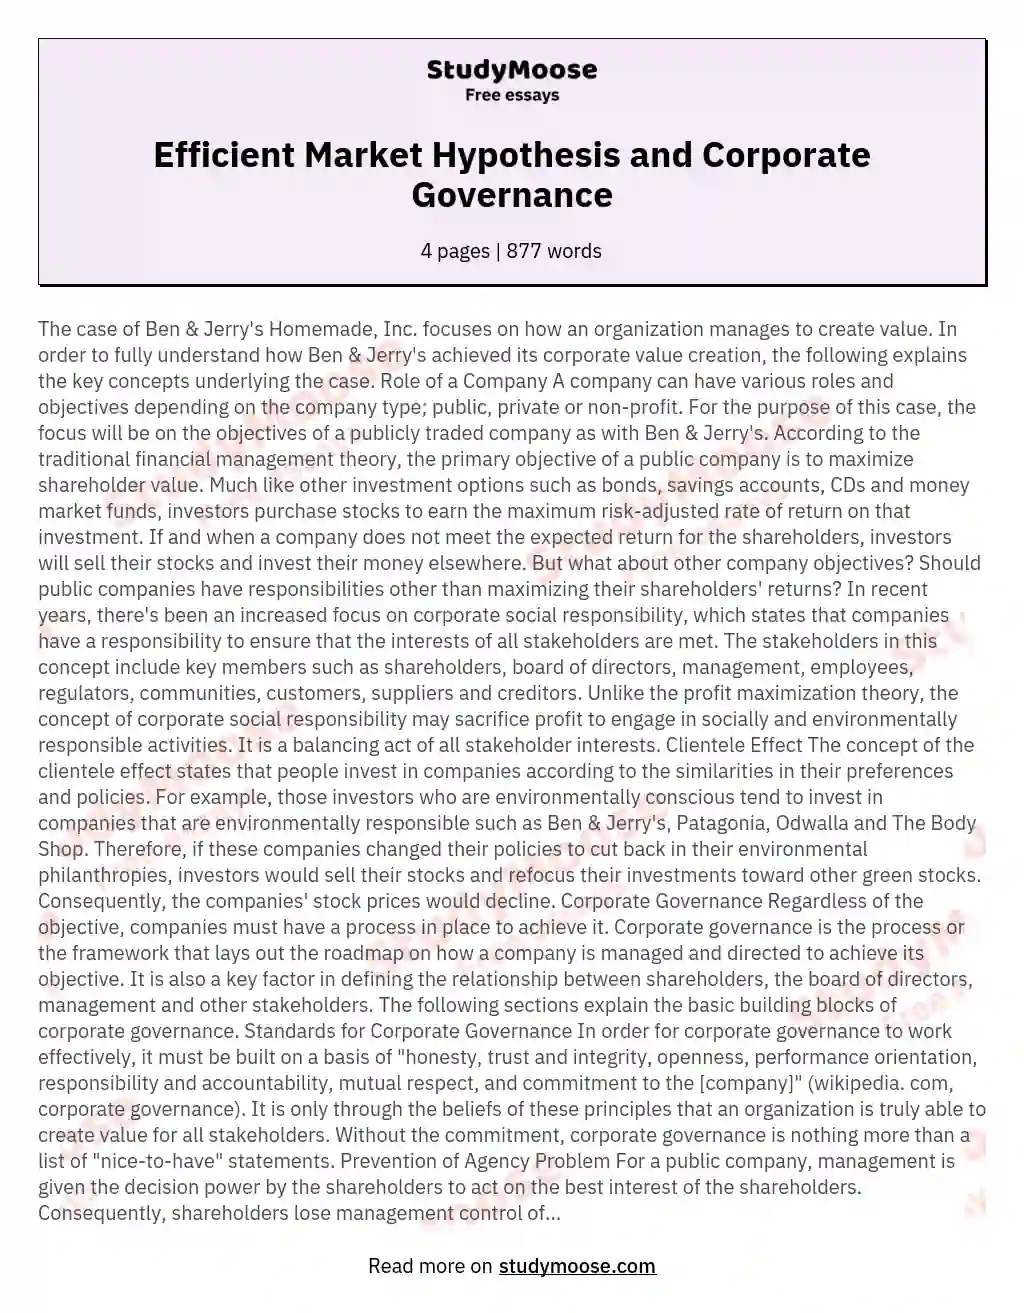 Efficient Market Hypothesis and Corporate Governance essay